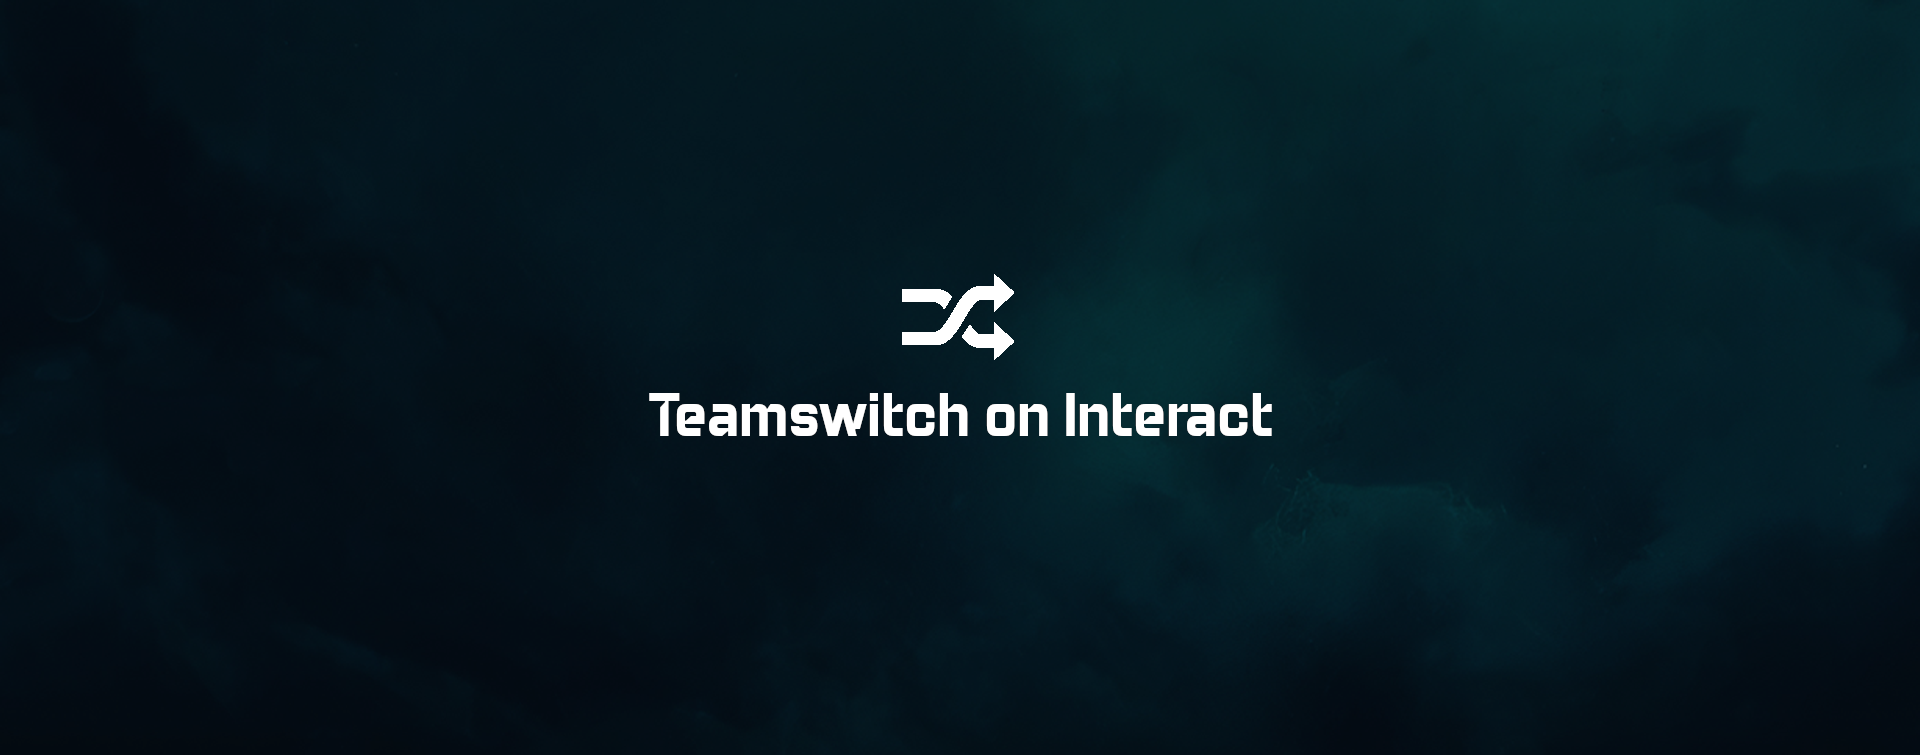 team-switch-on-interact